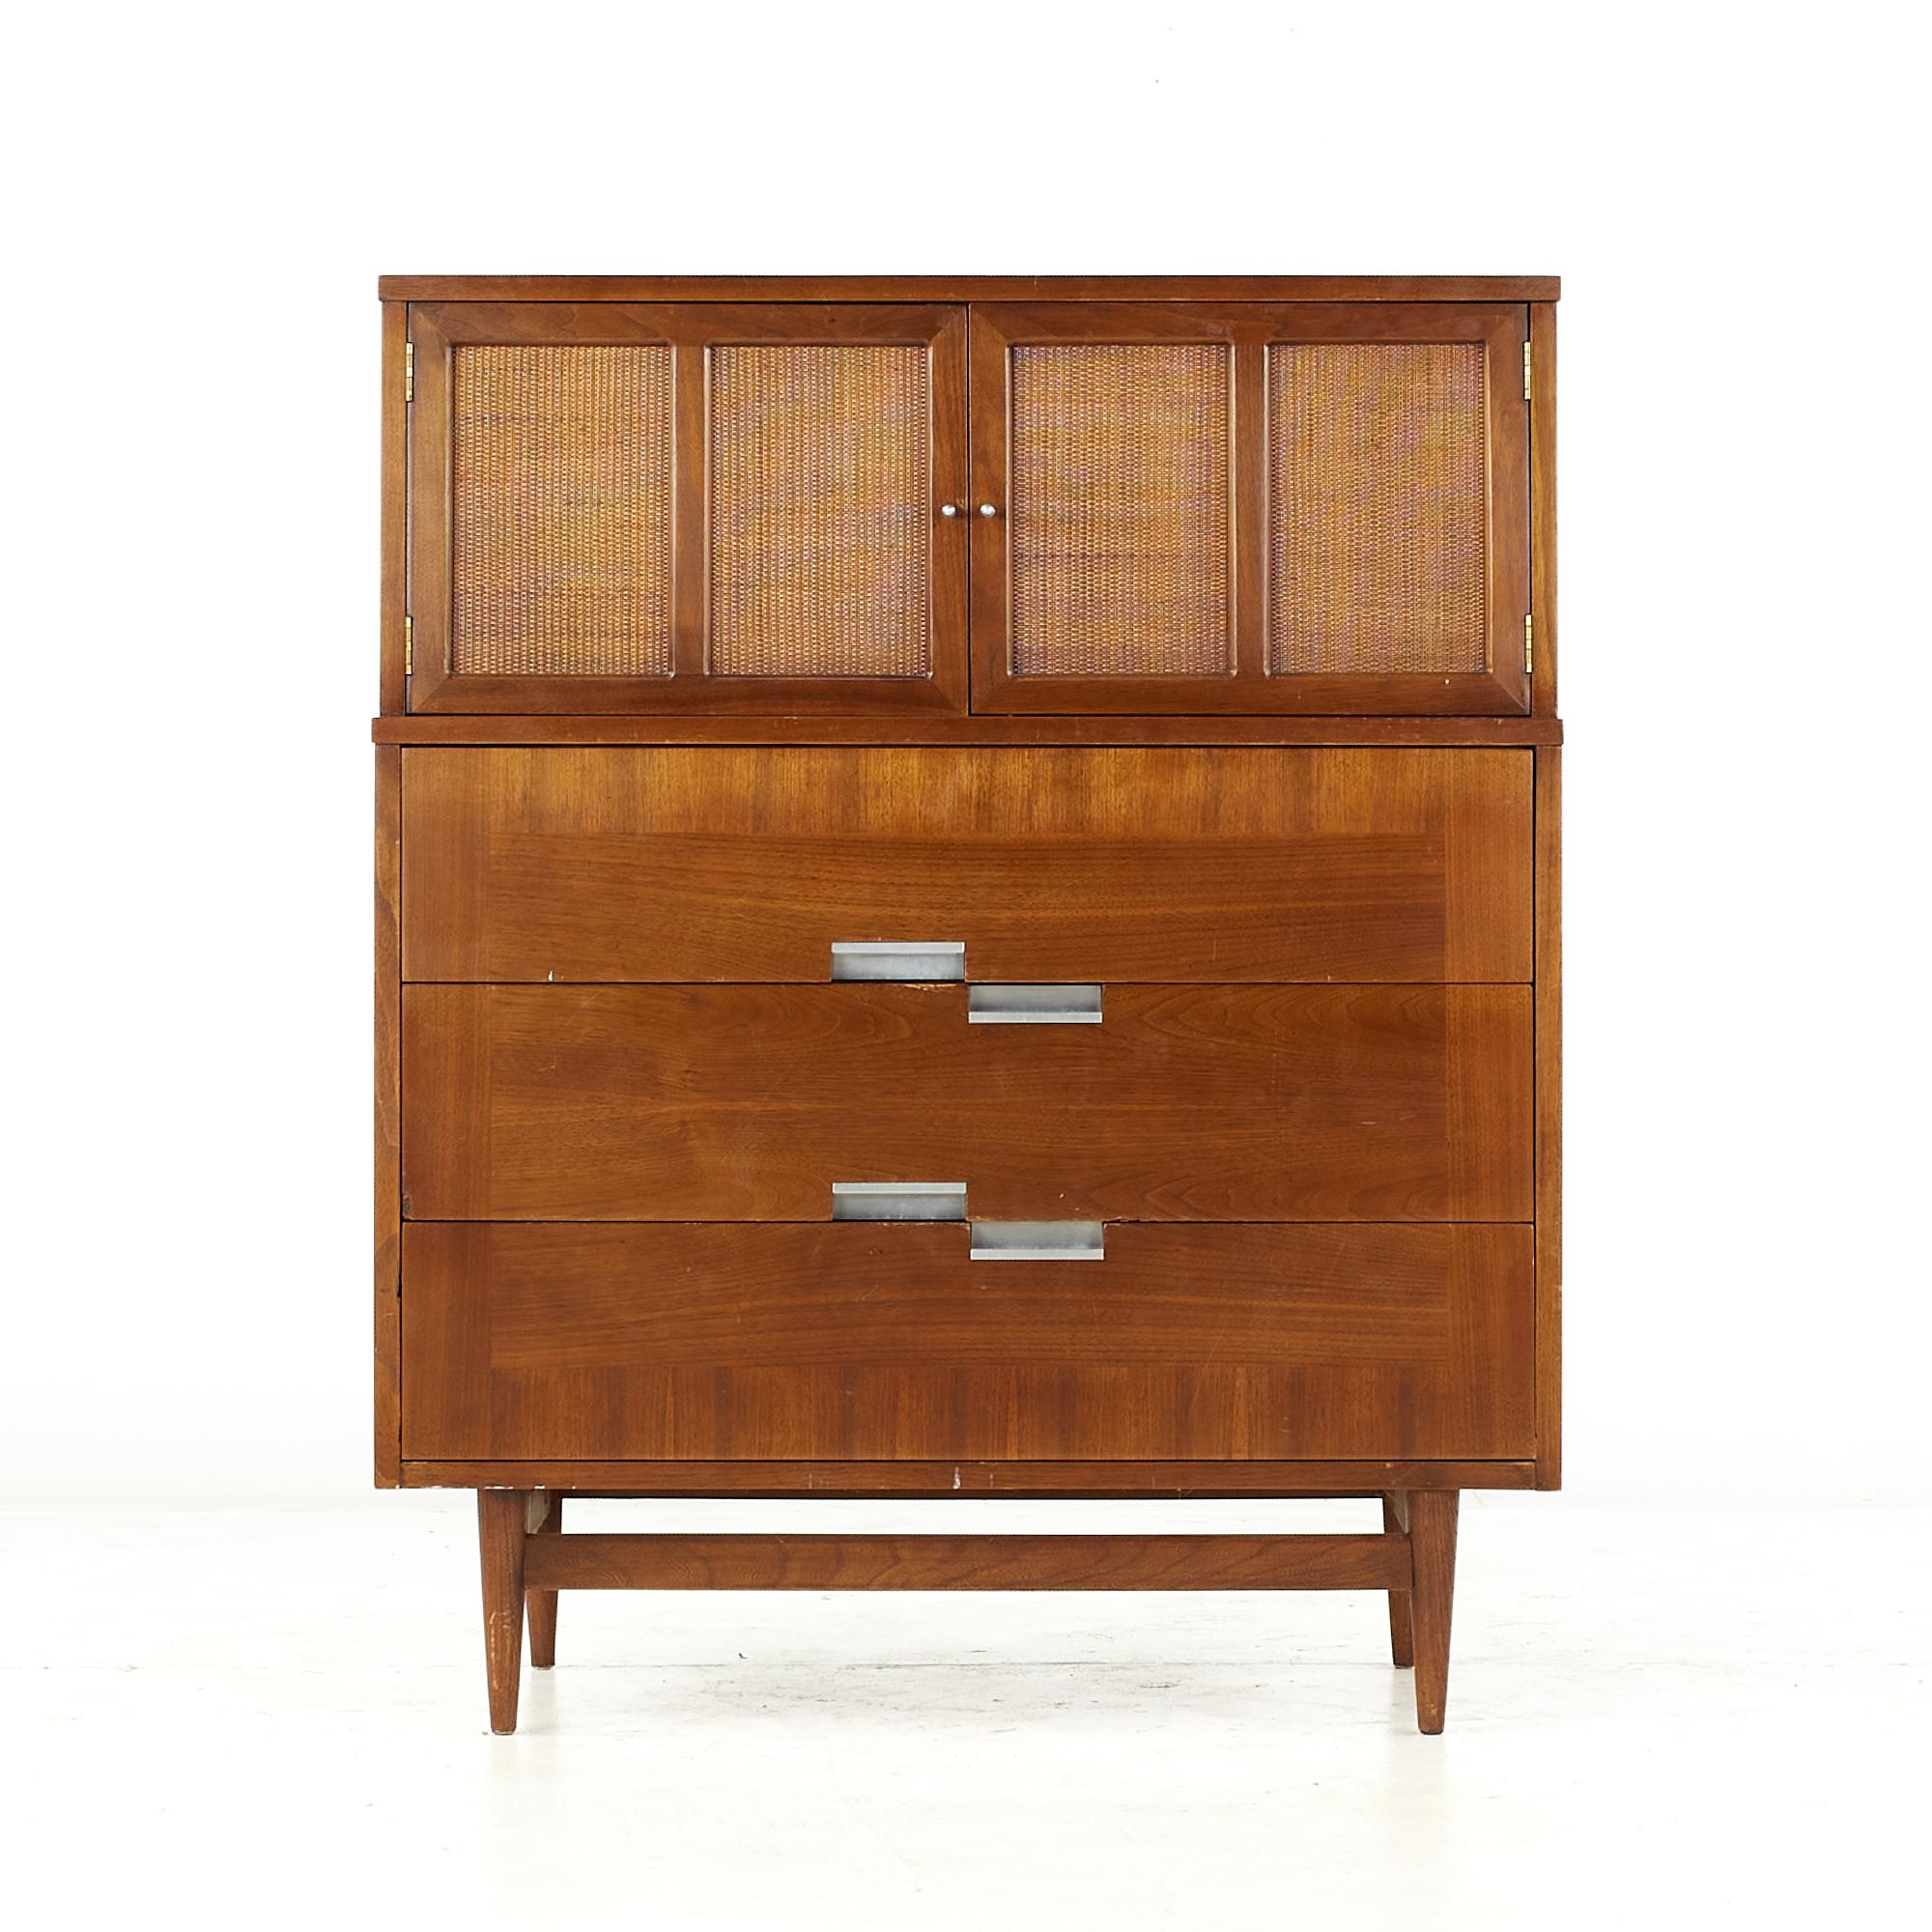 Merton Gershun for American of Martinsville Mid Century Walnut and Cane Front Highboy dresser

This dresser measures: 36 wide x 18.5 deep x 44.5 inches high

All pieces of furniture can be had in what we call restored vintage condition. That